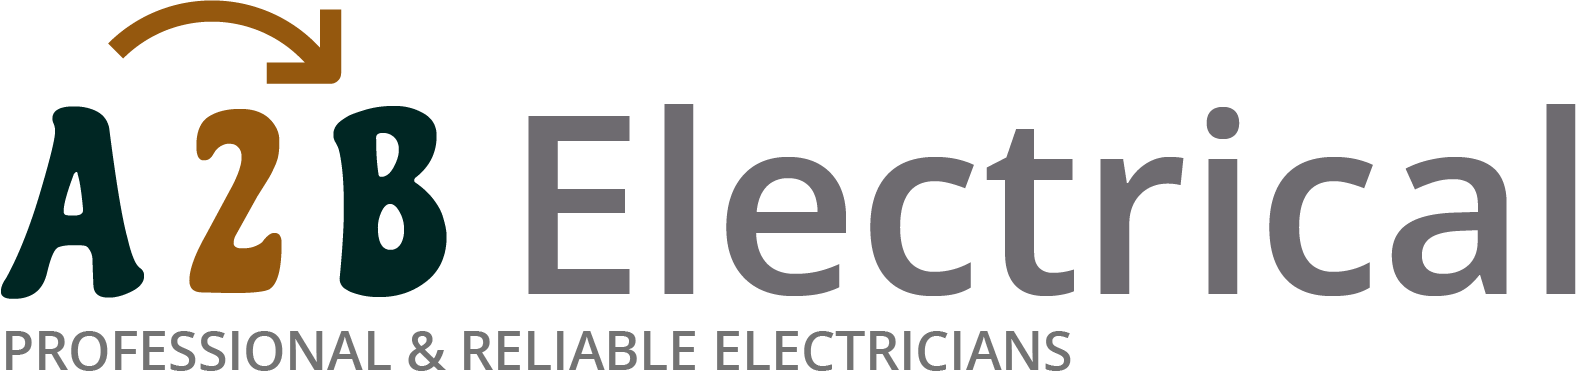 If you have electrical wiring problems in Portchester, we can provide an electrician to have a look for you. 